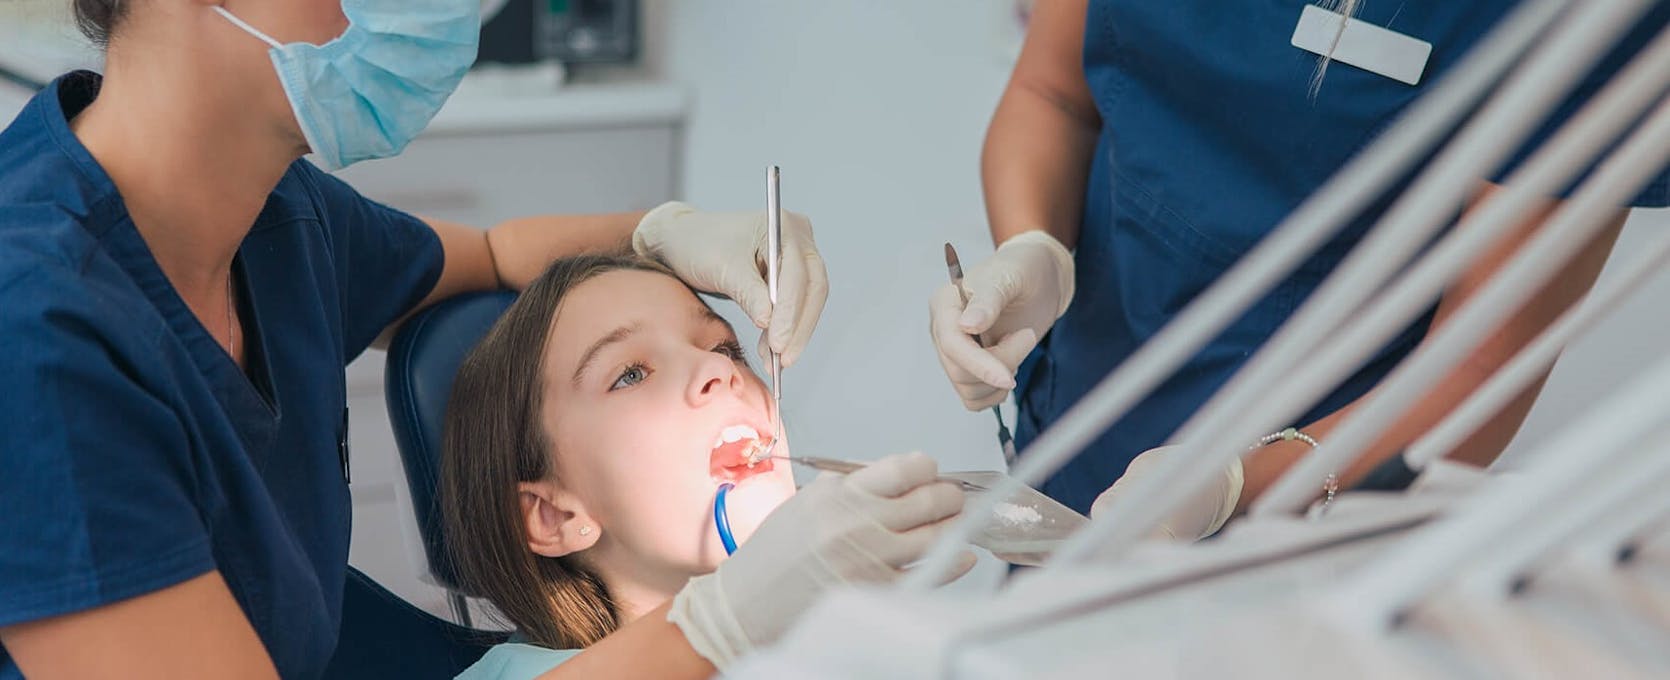 Patient receives care at a dental office